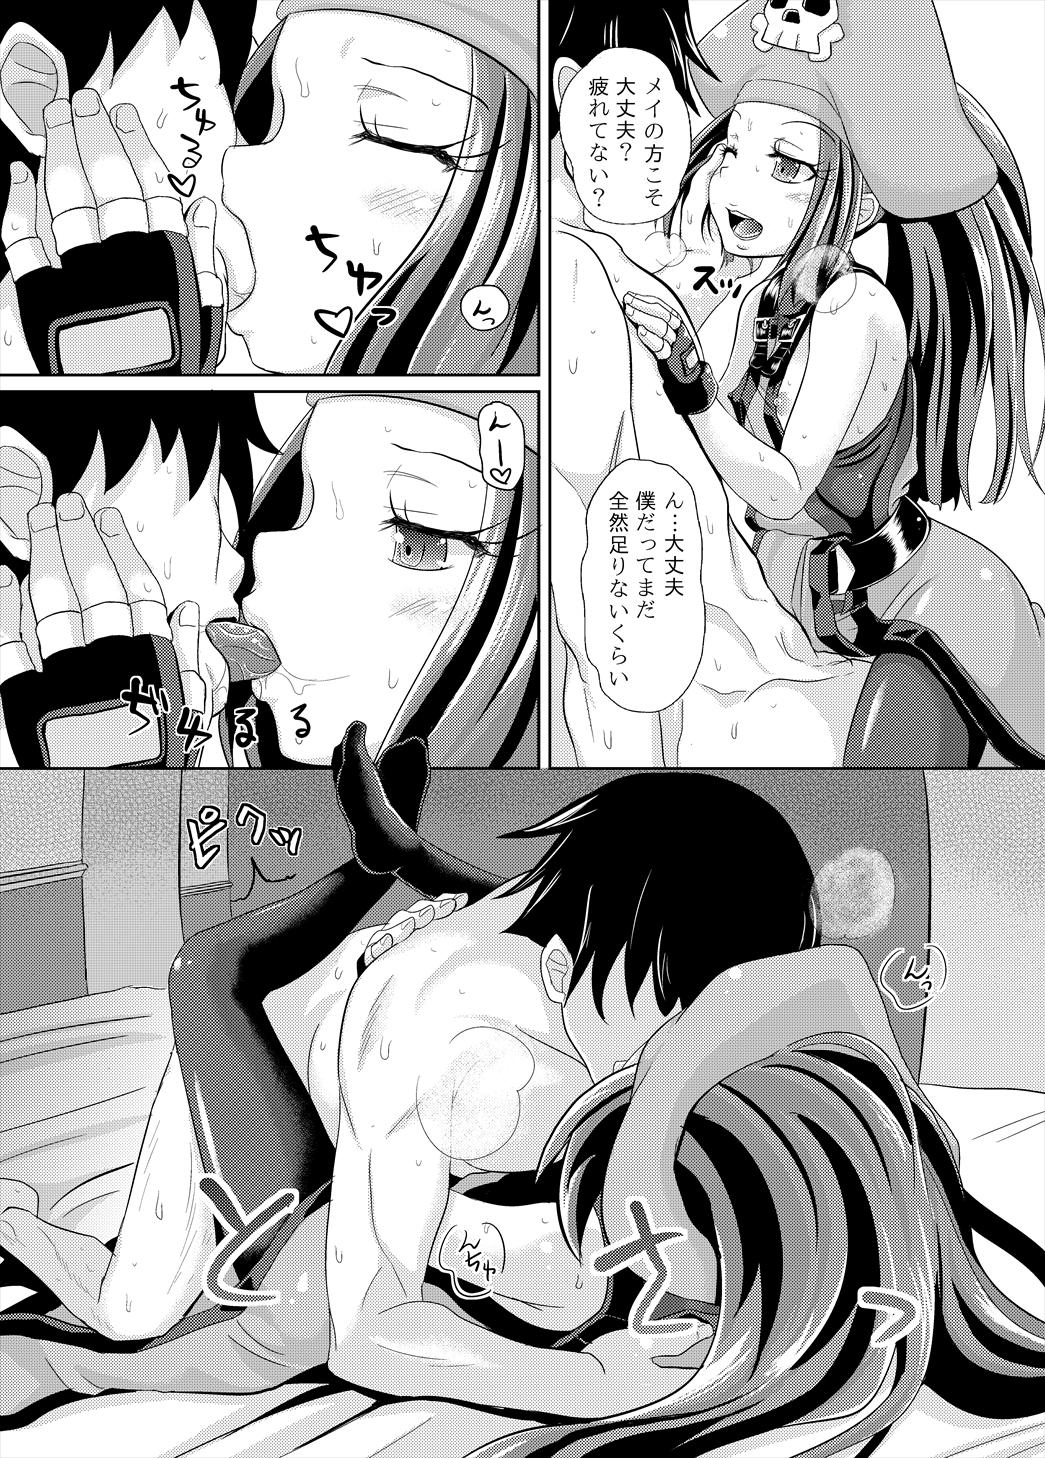 Teasing May Zanmai - Guilty gear Missionary Porn - Page 4